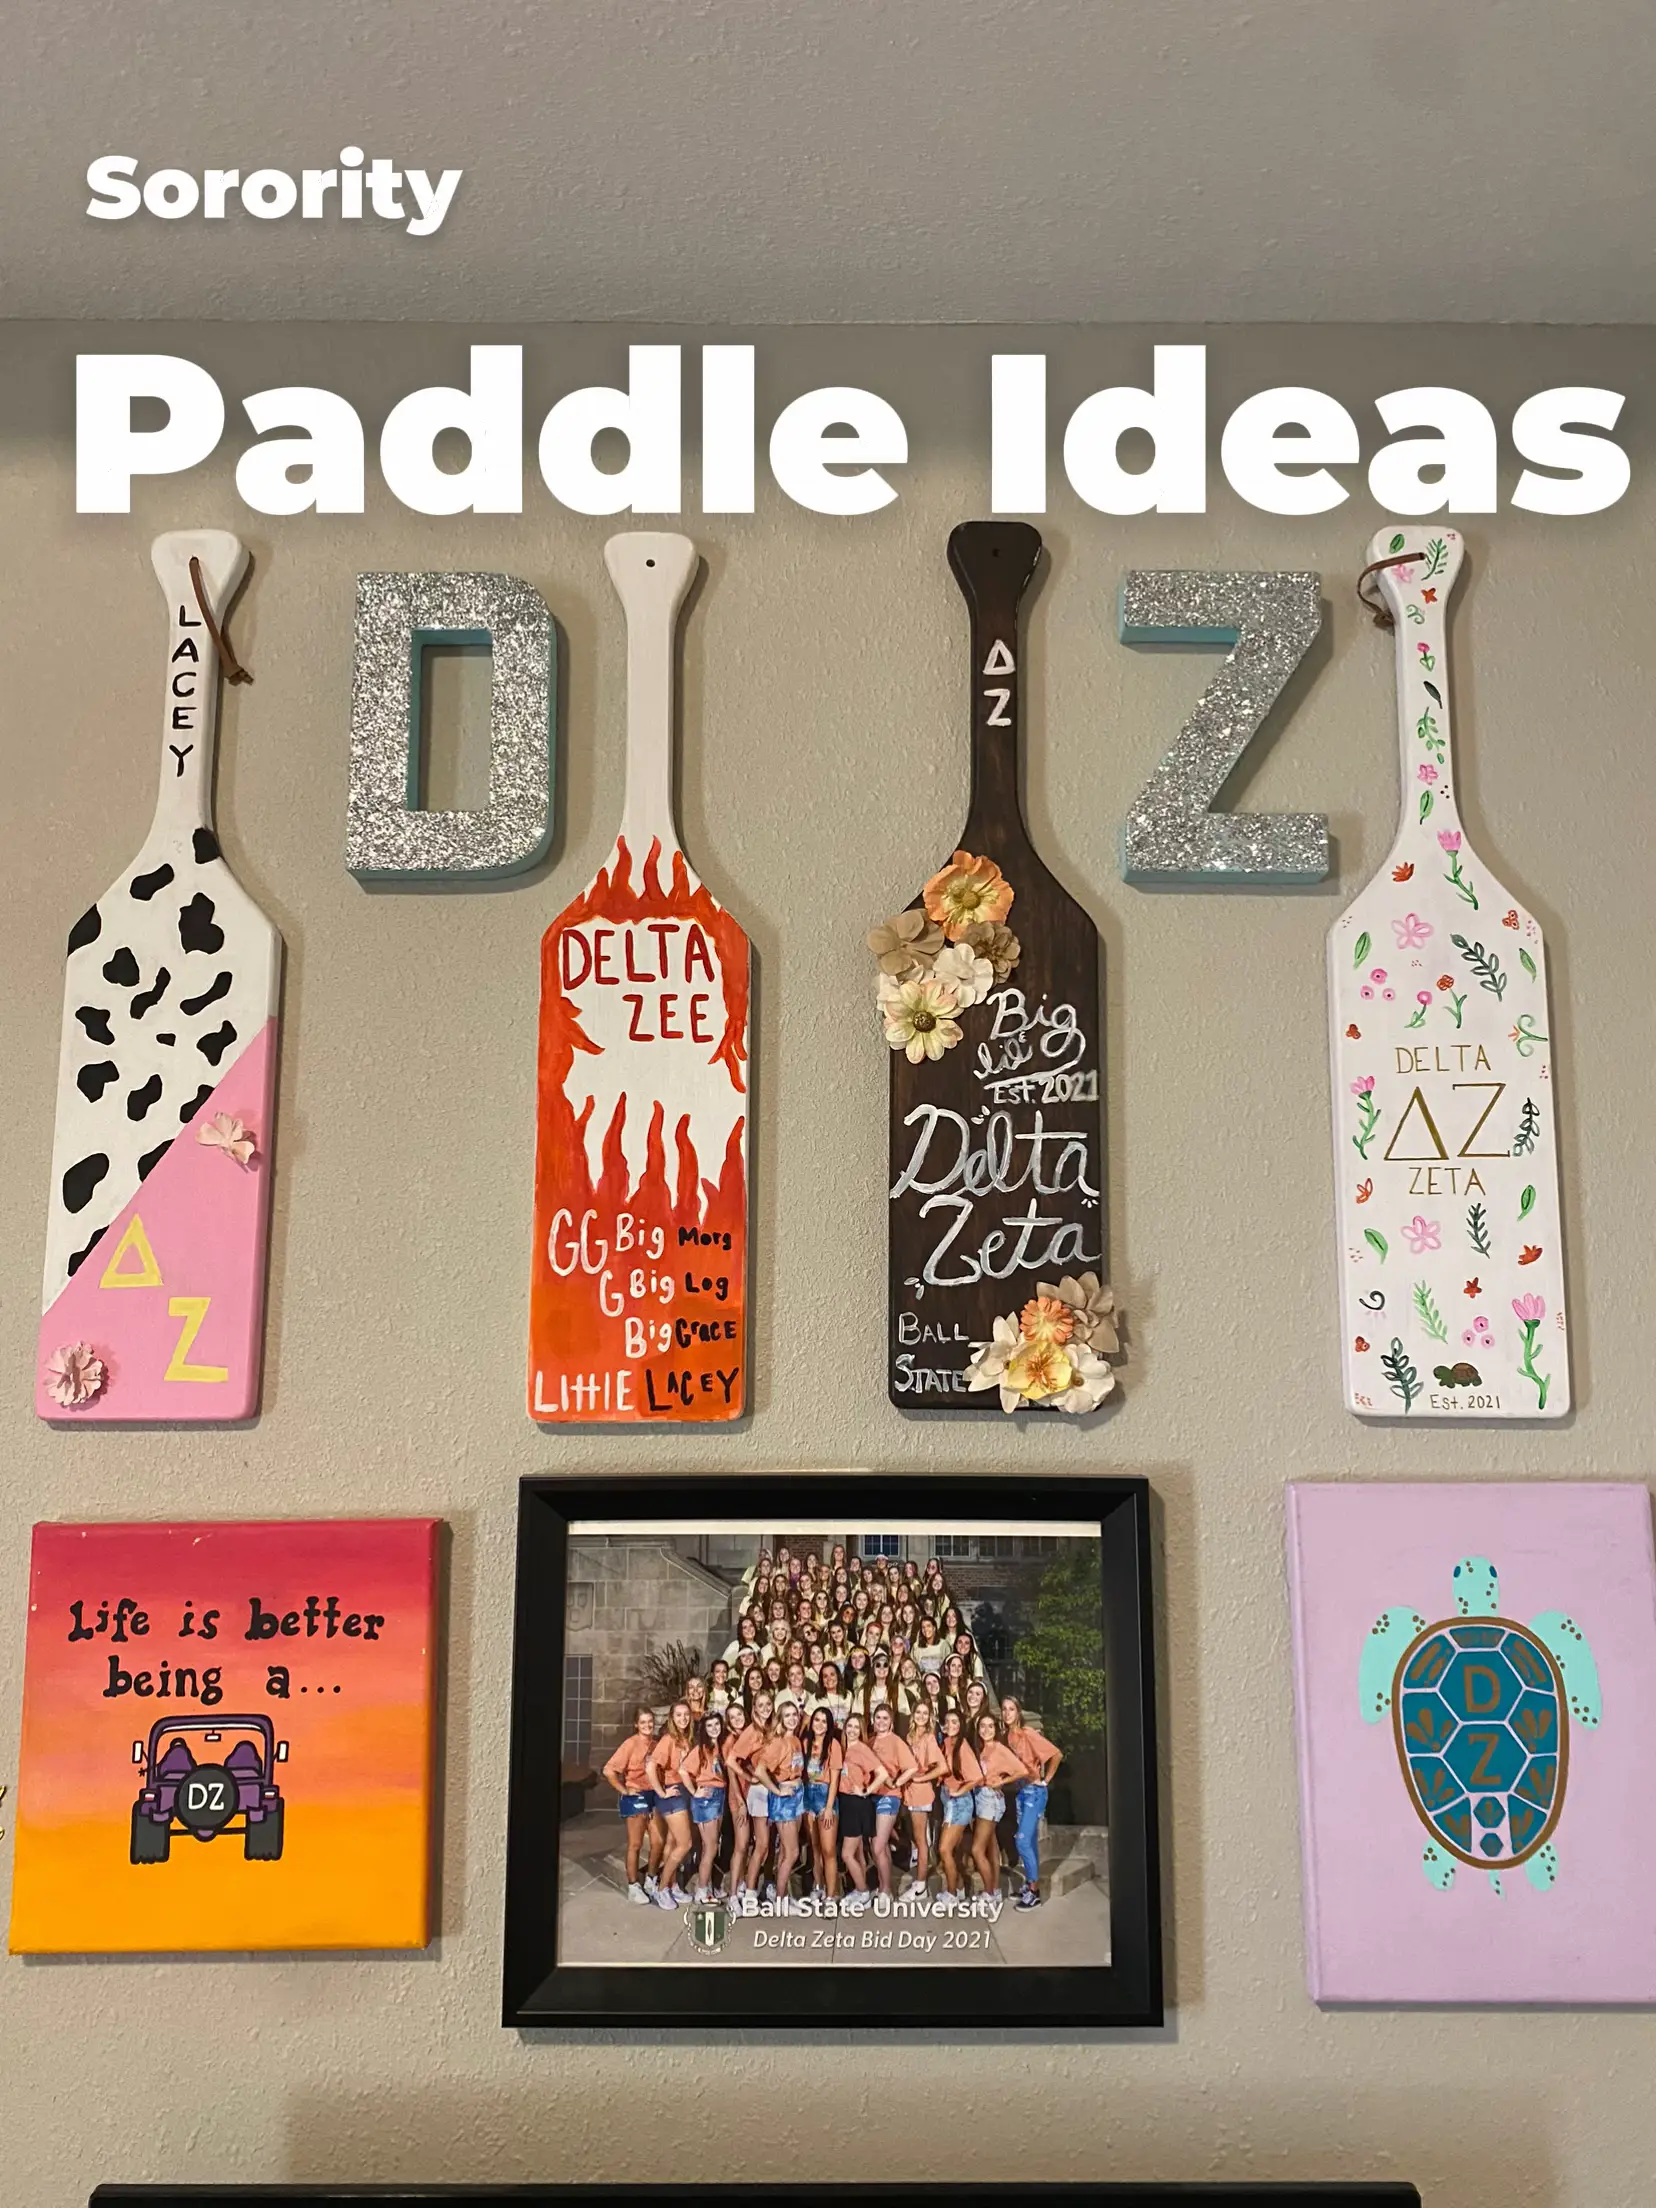 50 Thoughts Every Sorority Girl Has While Making a Paddle